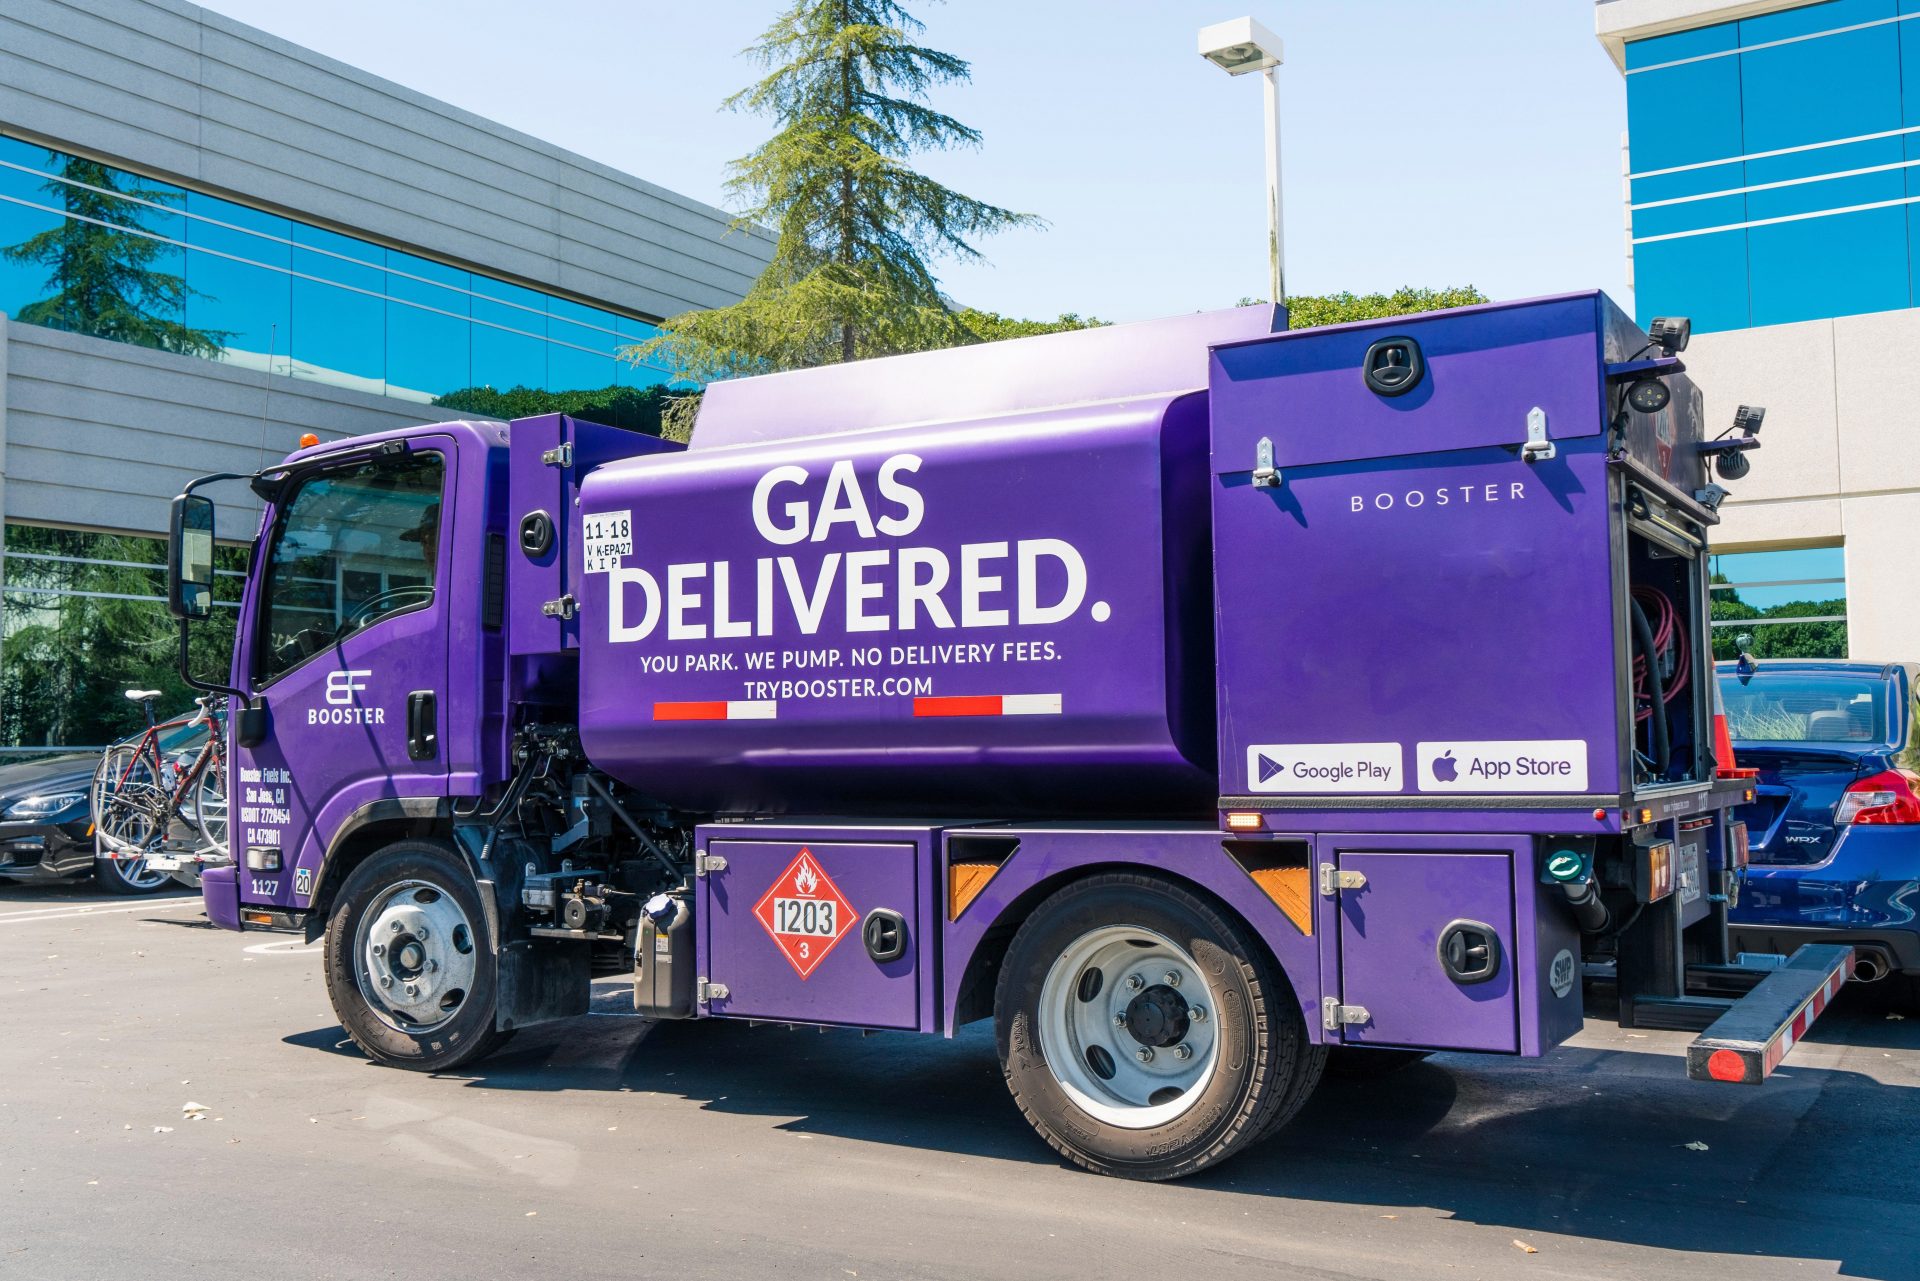 Does this Manufacture Sense? Gas Delivered to Your Car